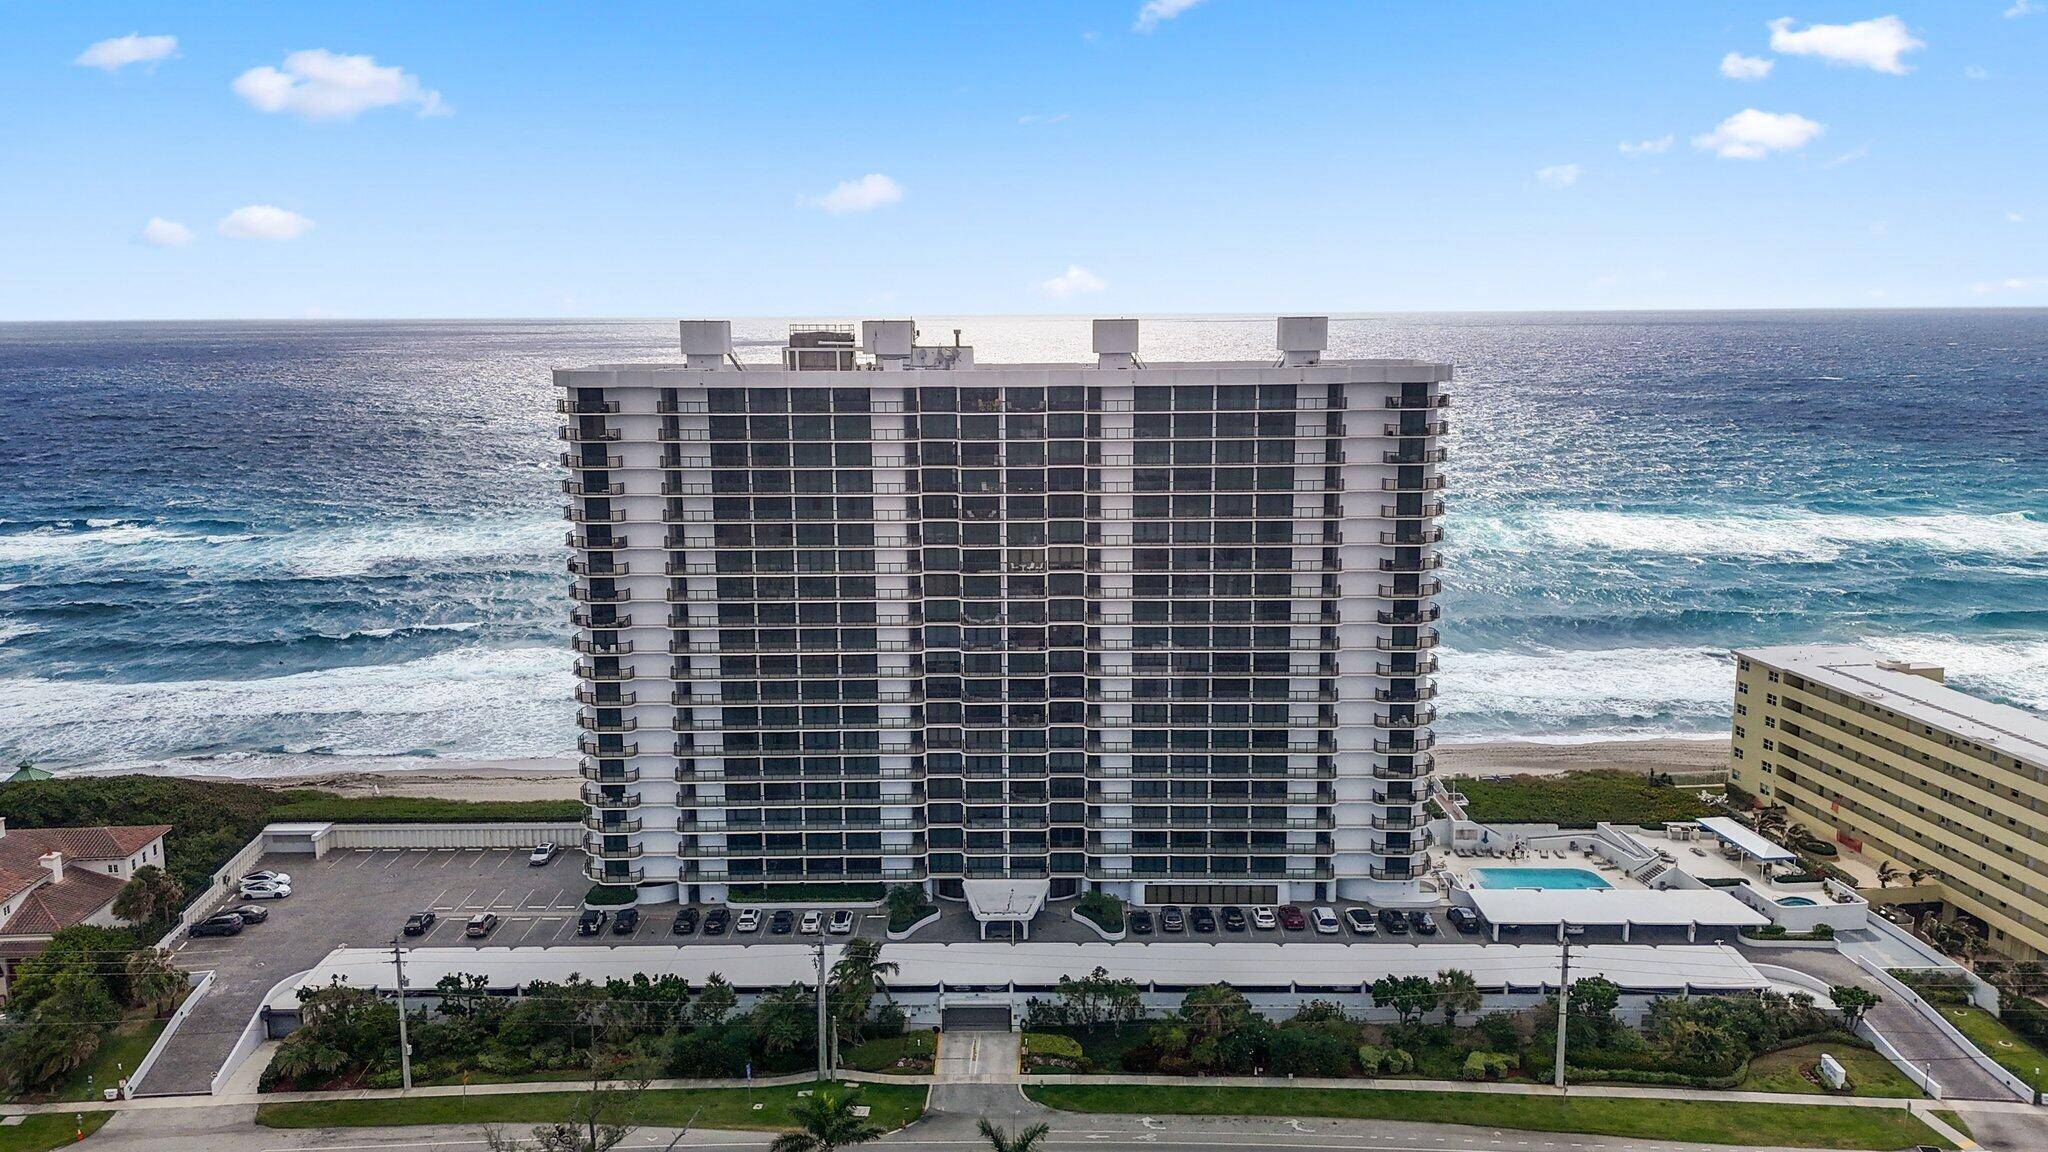 Indulge in luxurious seaside living with this exquisite 2 bedroom, 2.